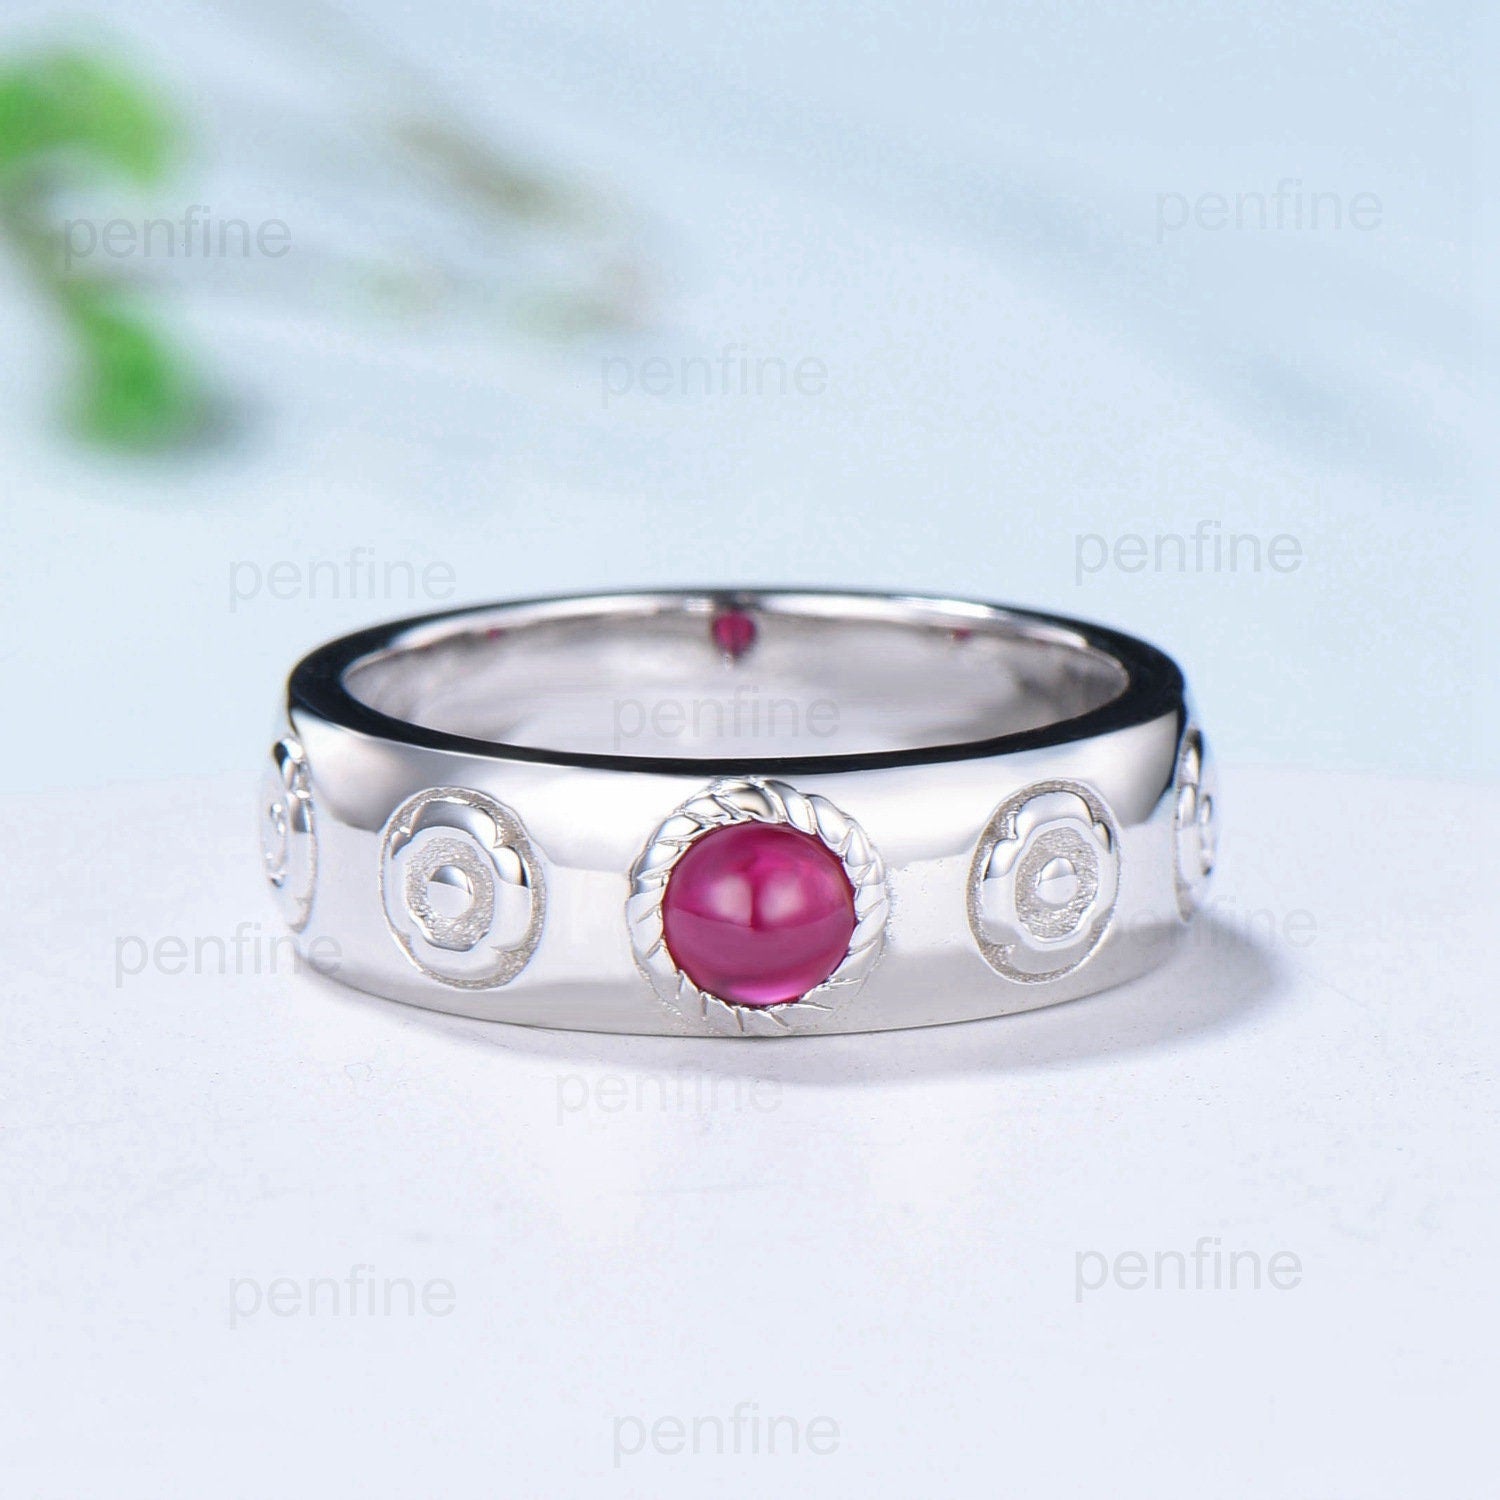 Howls Moving Castle Men's Ring 4mm Round Natural Ruby Wedding Band Silver White Gold Howl's Ring Sophie's Ring Stacking Matching Band Gift - PENFINE